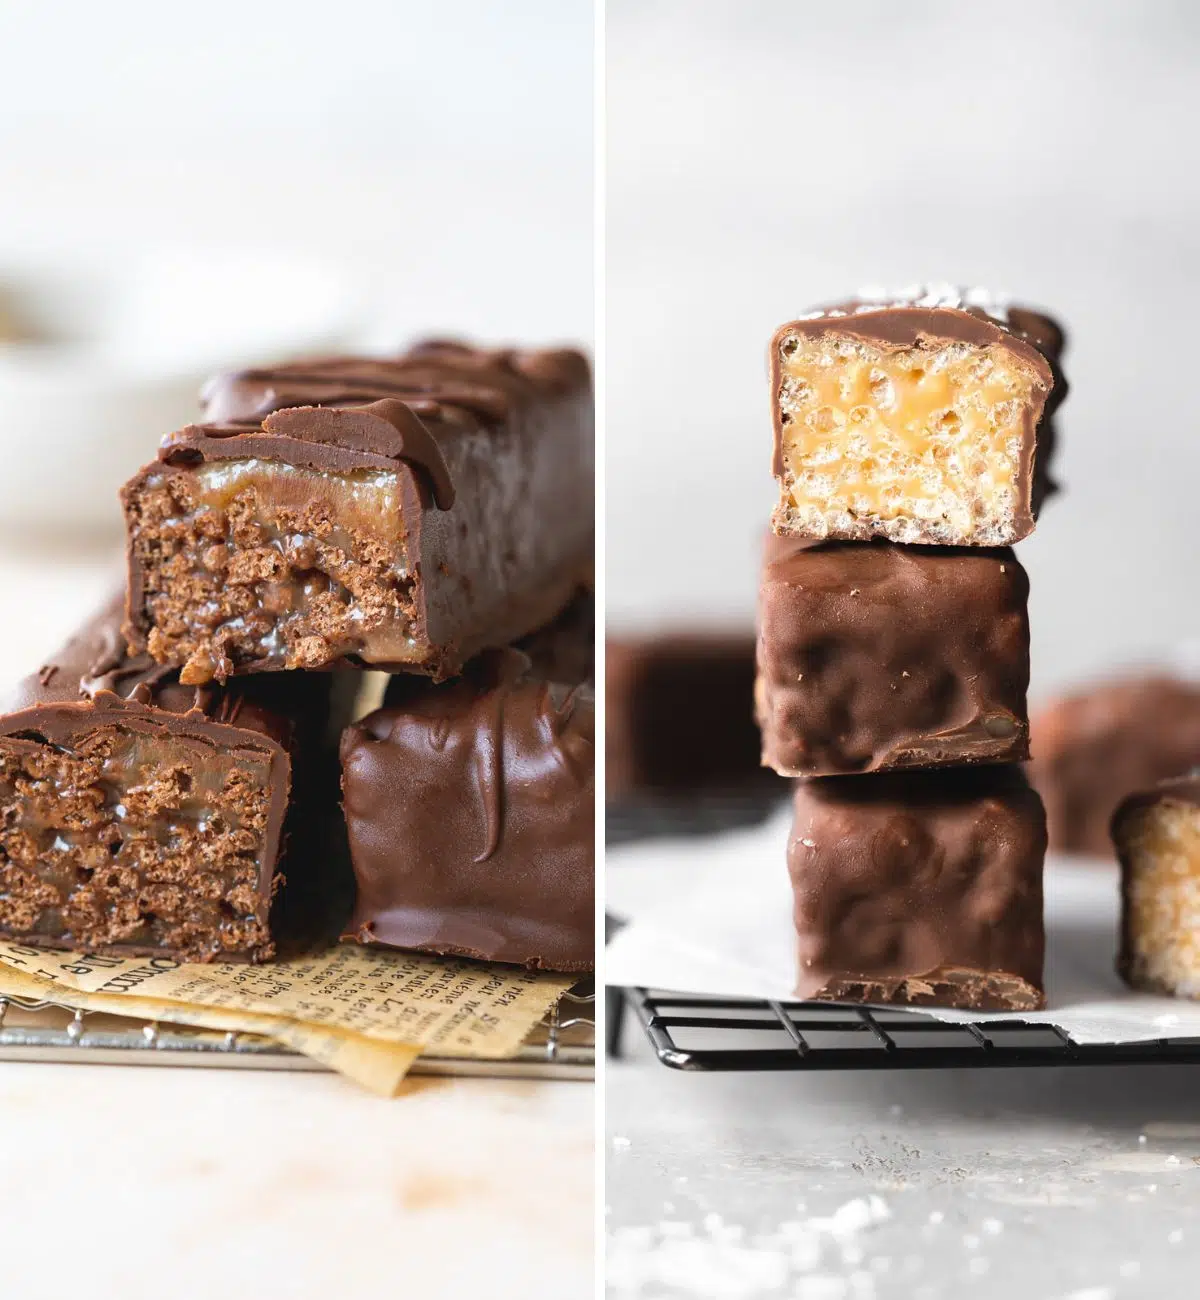 toffee crisp bars with coco cereal and rice krispy cereal, and coated in chocolate.